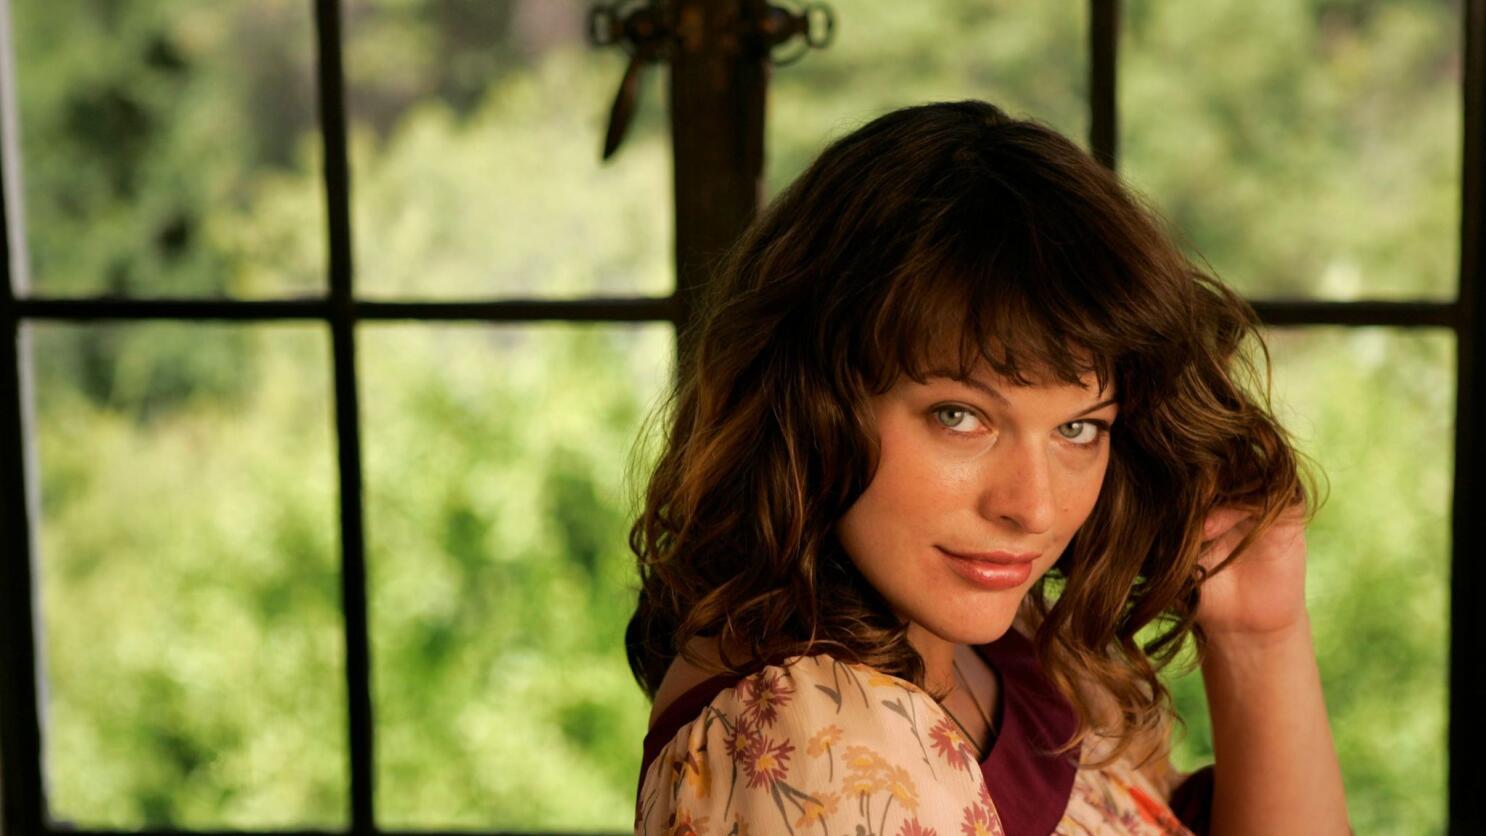 Resident Evil' Star Milla Jovovich Is the Most Underrated Action Star